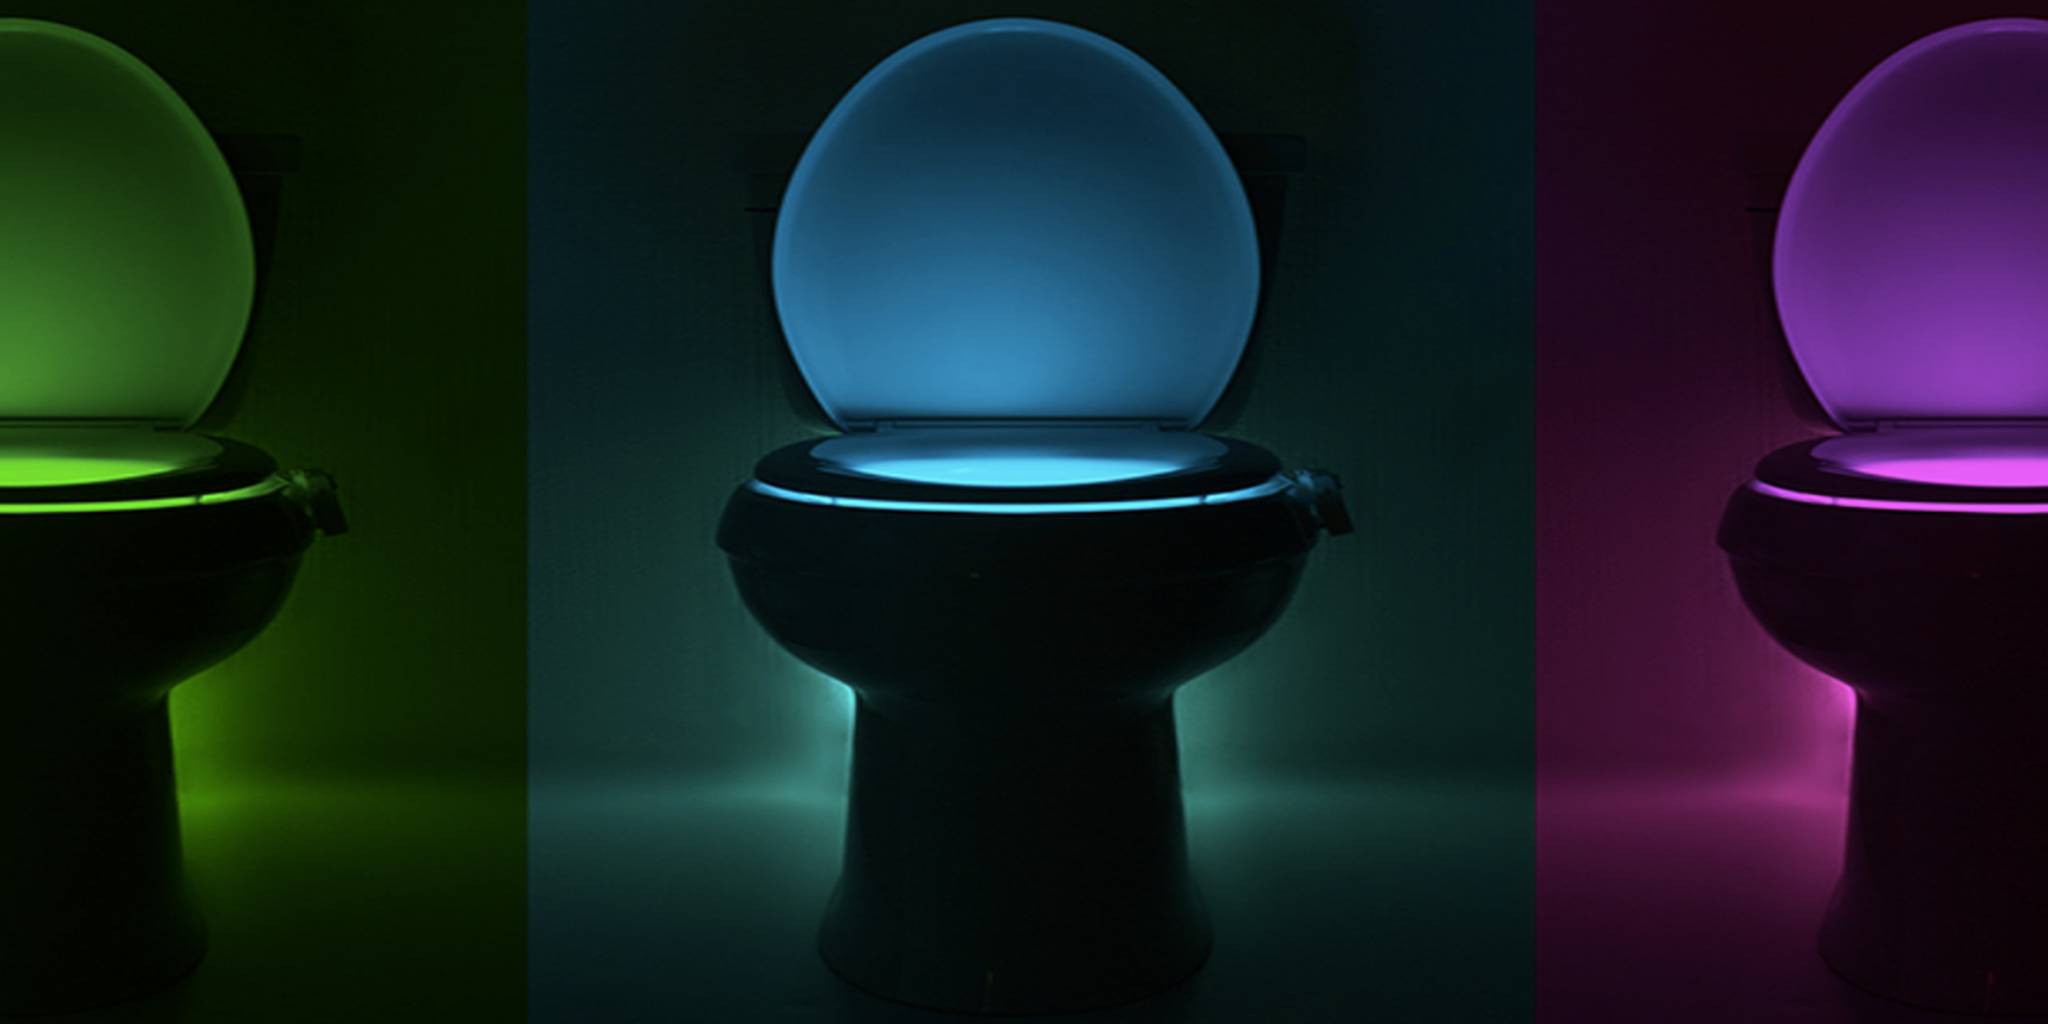 8 Amazing Toilet Lights Motion Detection for 2023